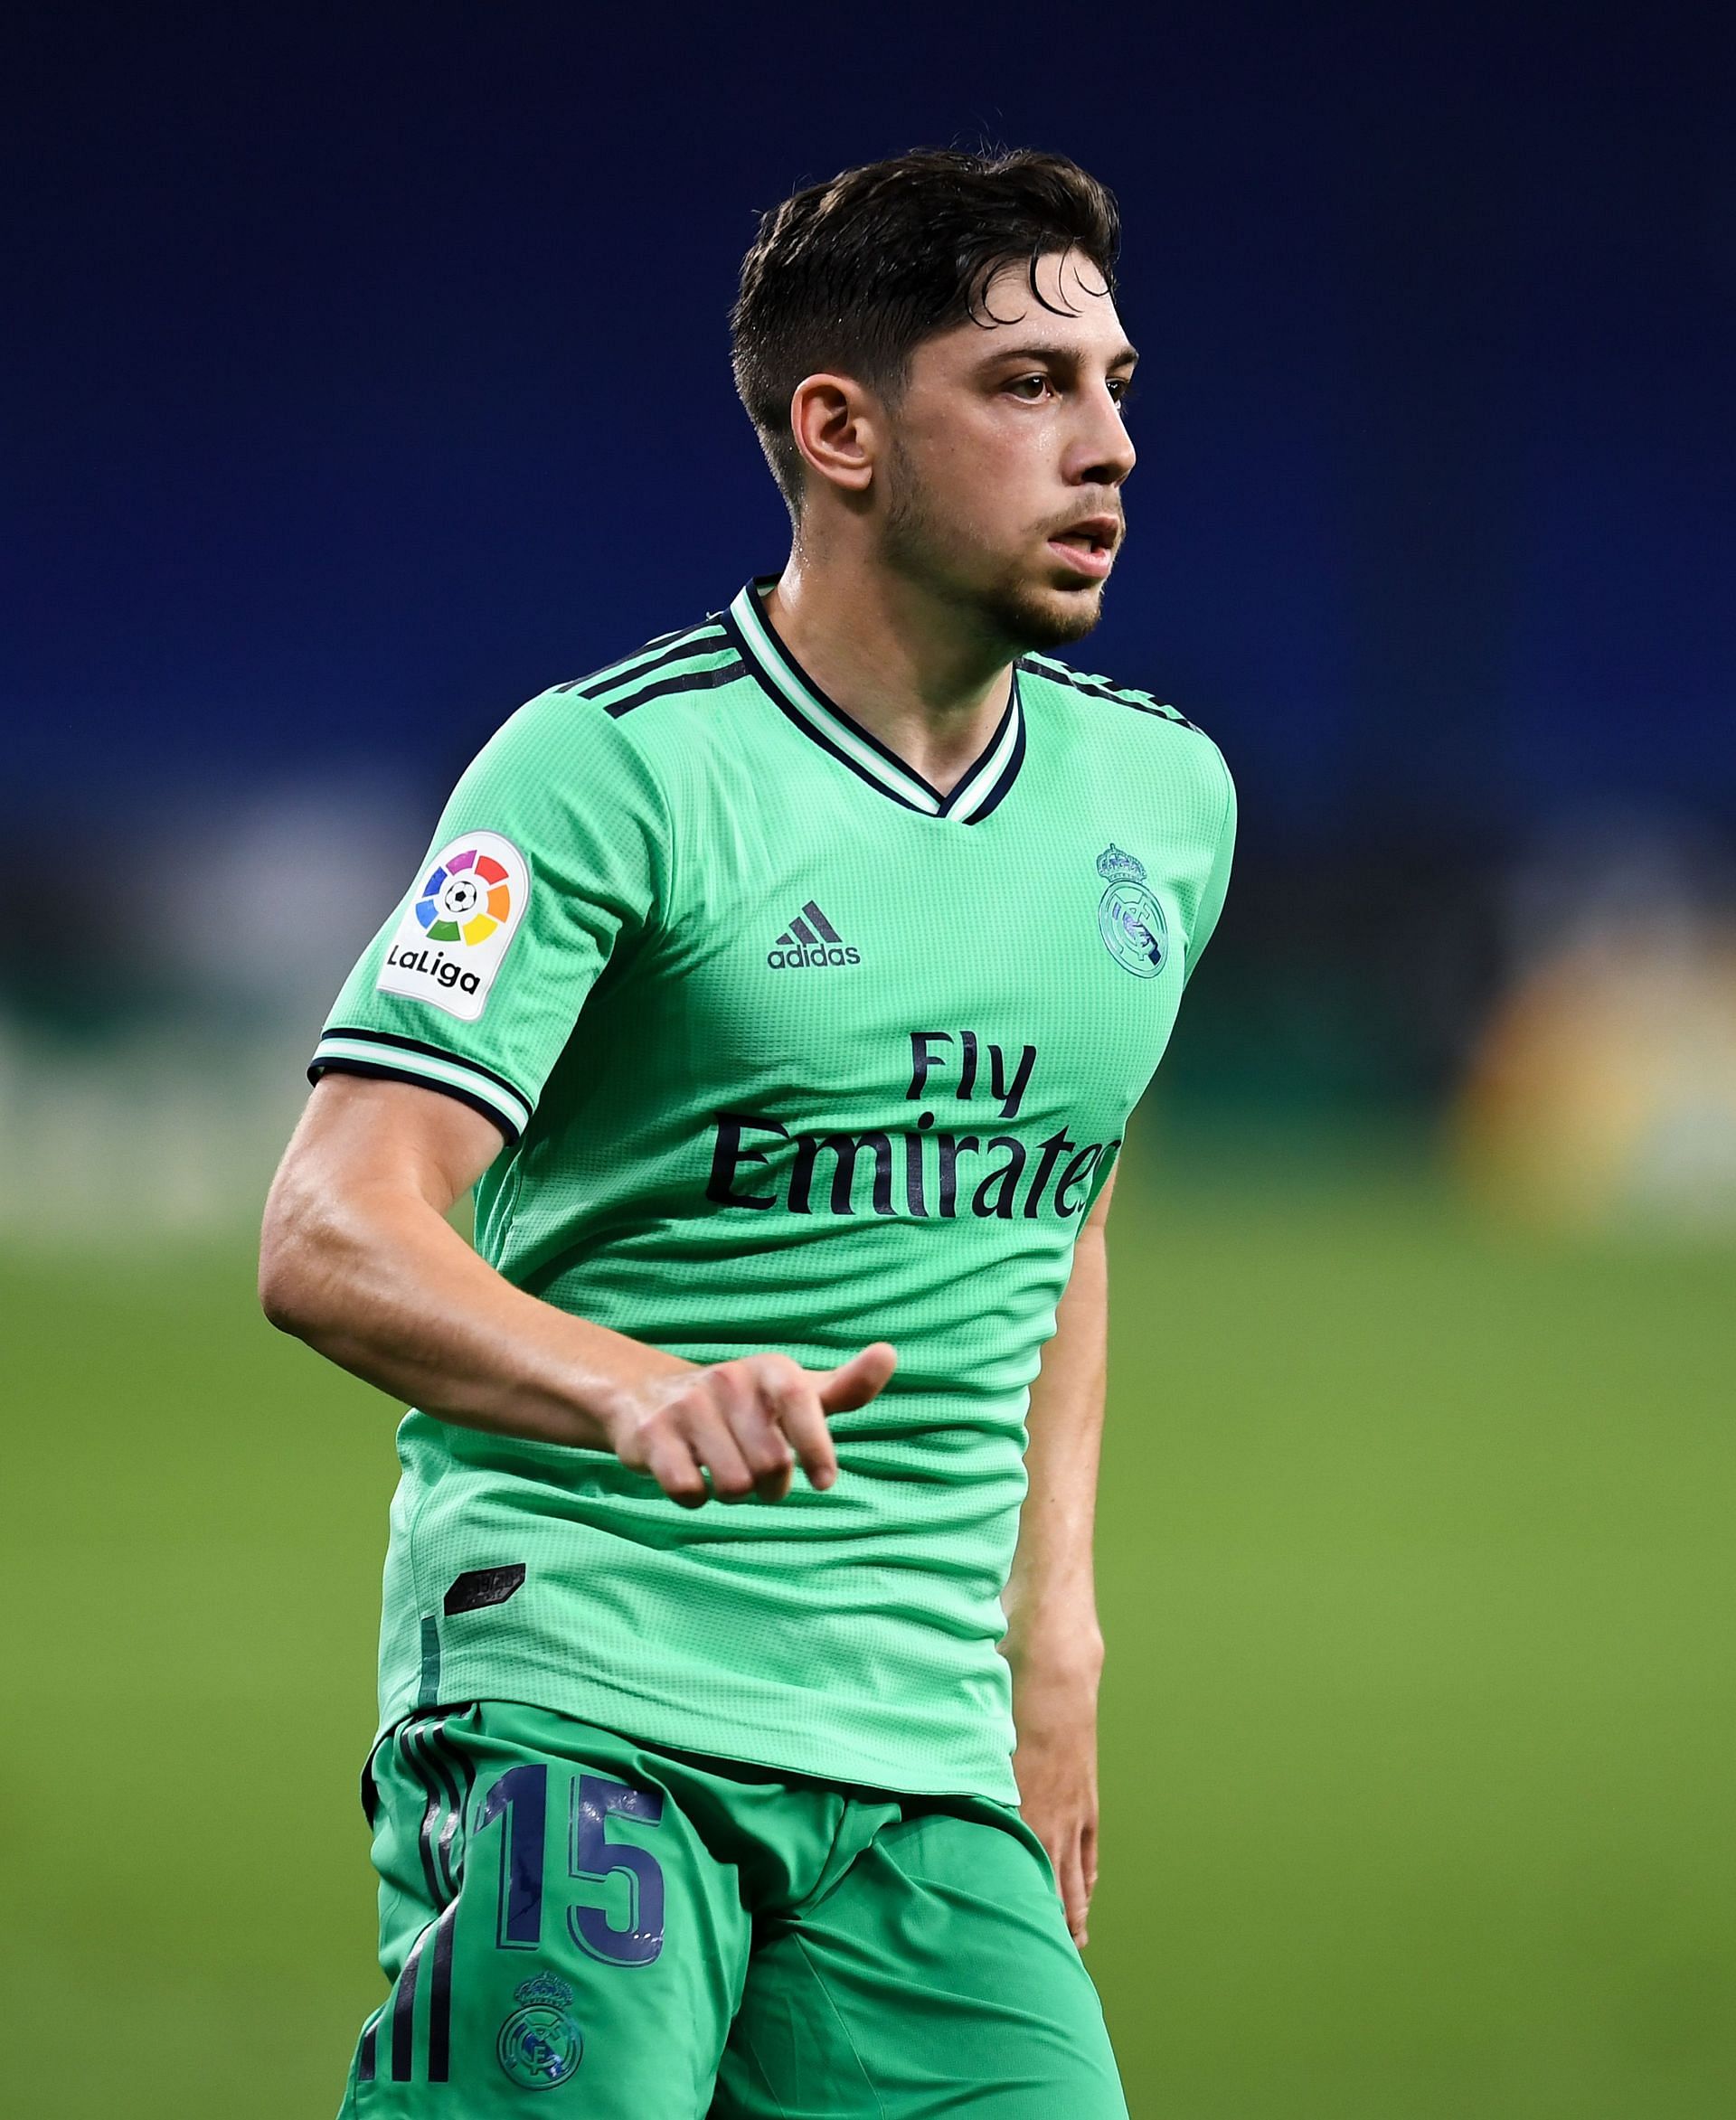 Federico Valverde scored the winining goal for Real Madrid in the 2021 Spanish Super Cup semi-final